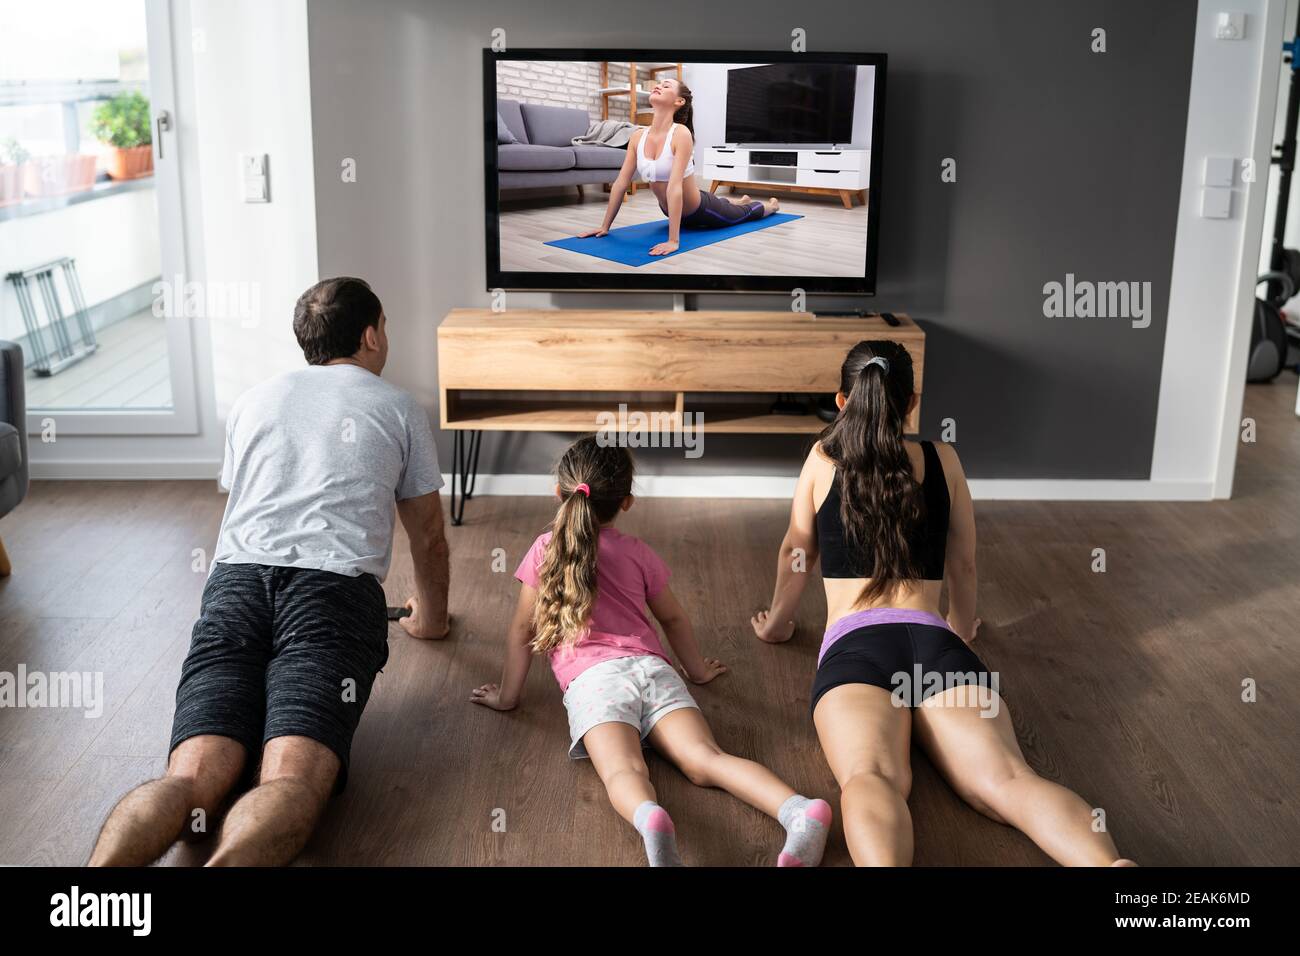 Fit Family Doing Home Online Stretching Yoga Fitness Stock Photo